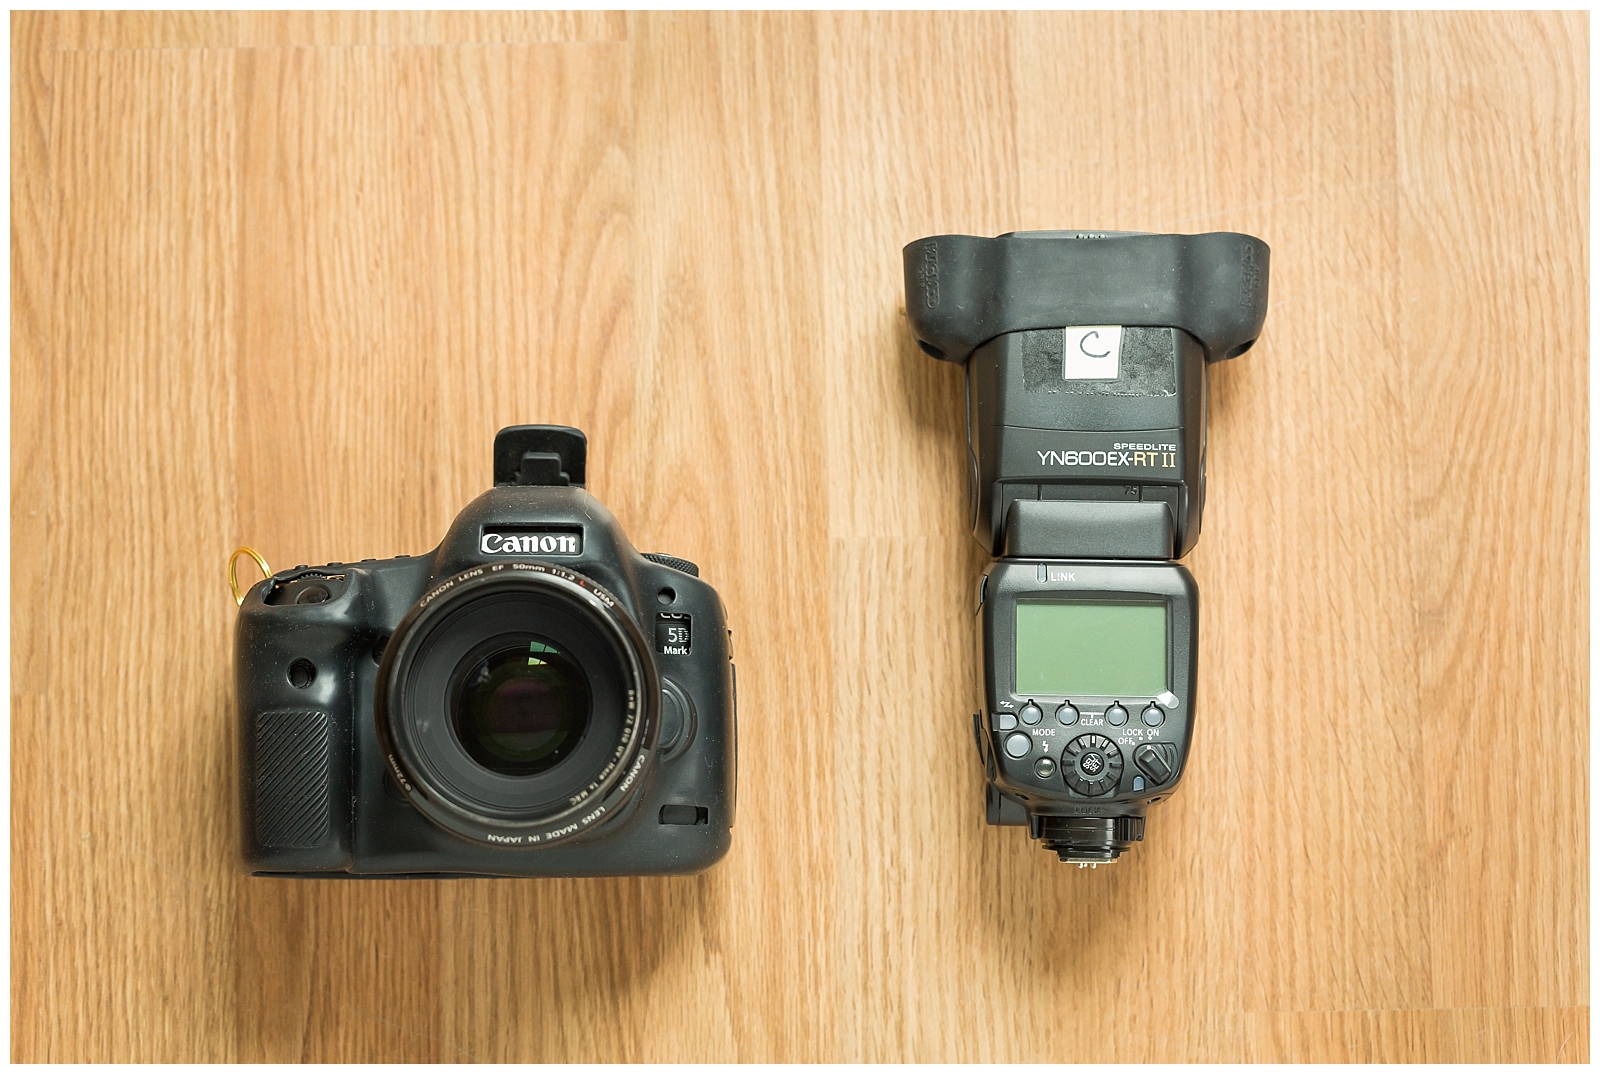 Canon professional camera and off camera flash set up by AGS Photo Art